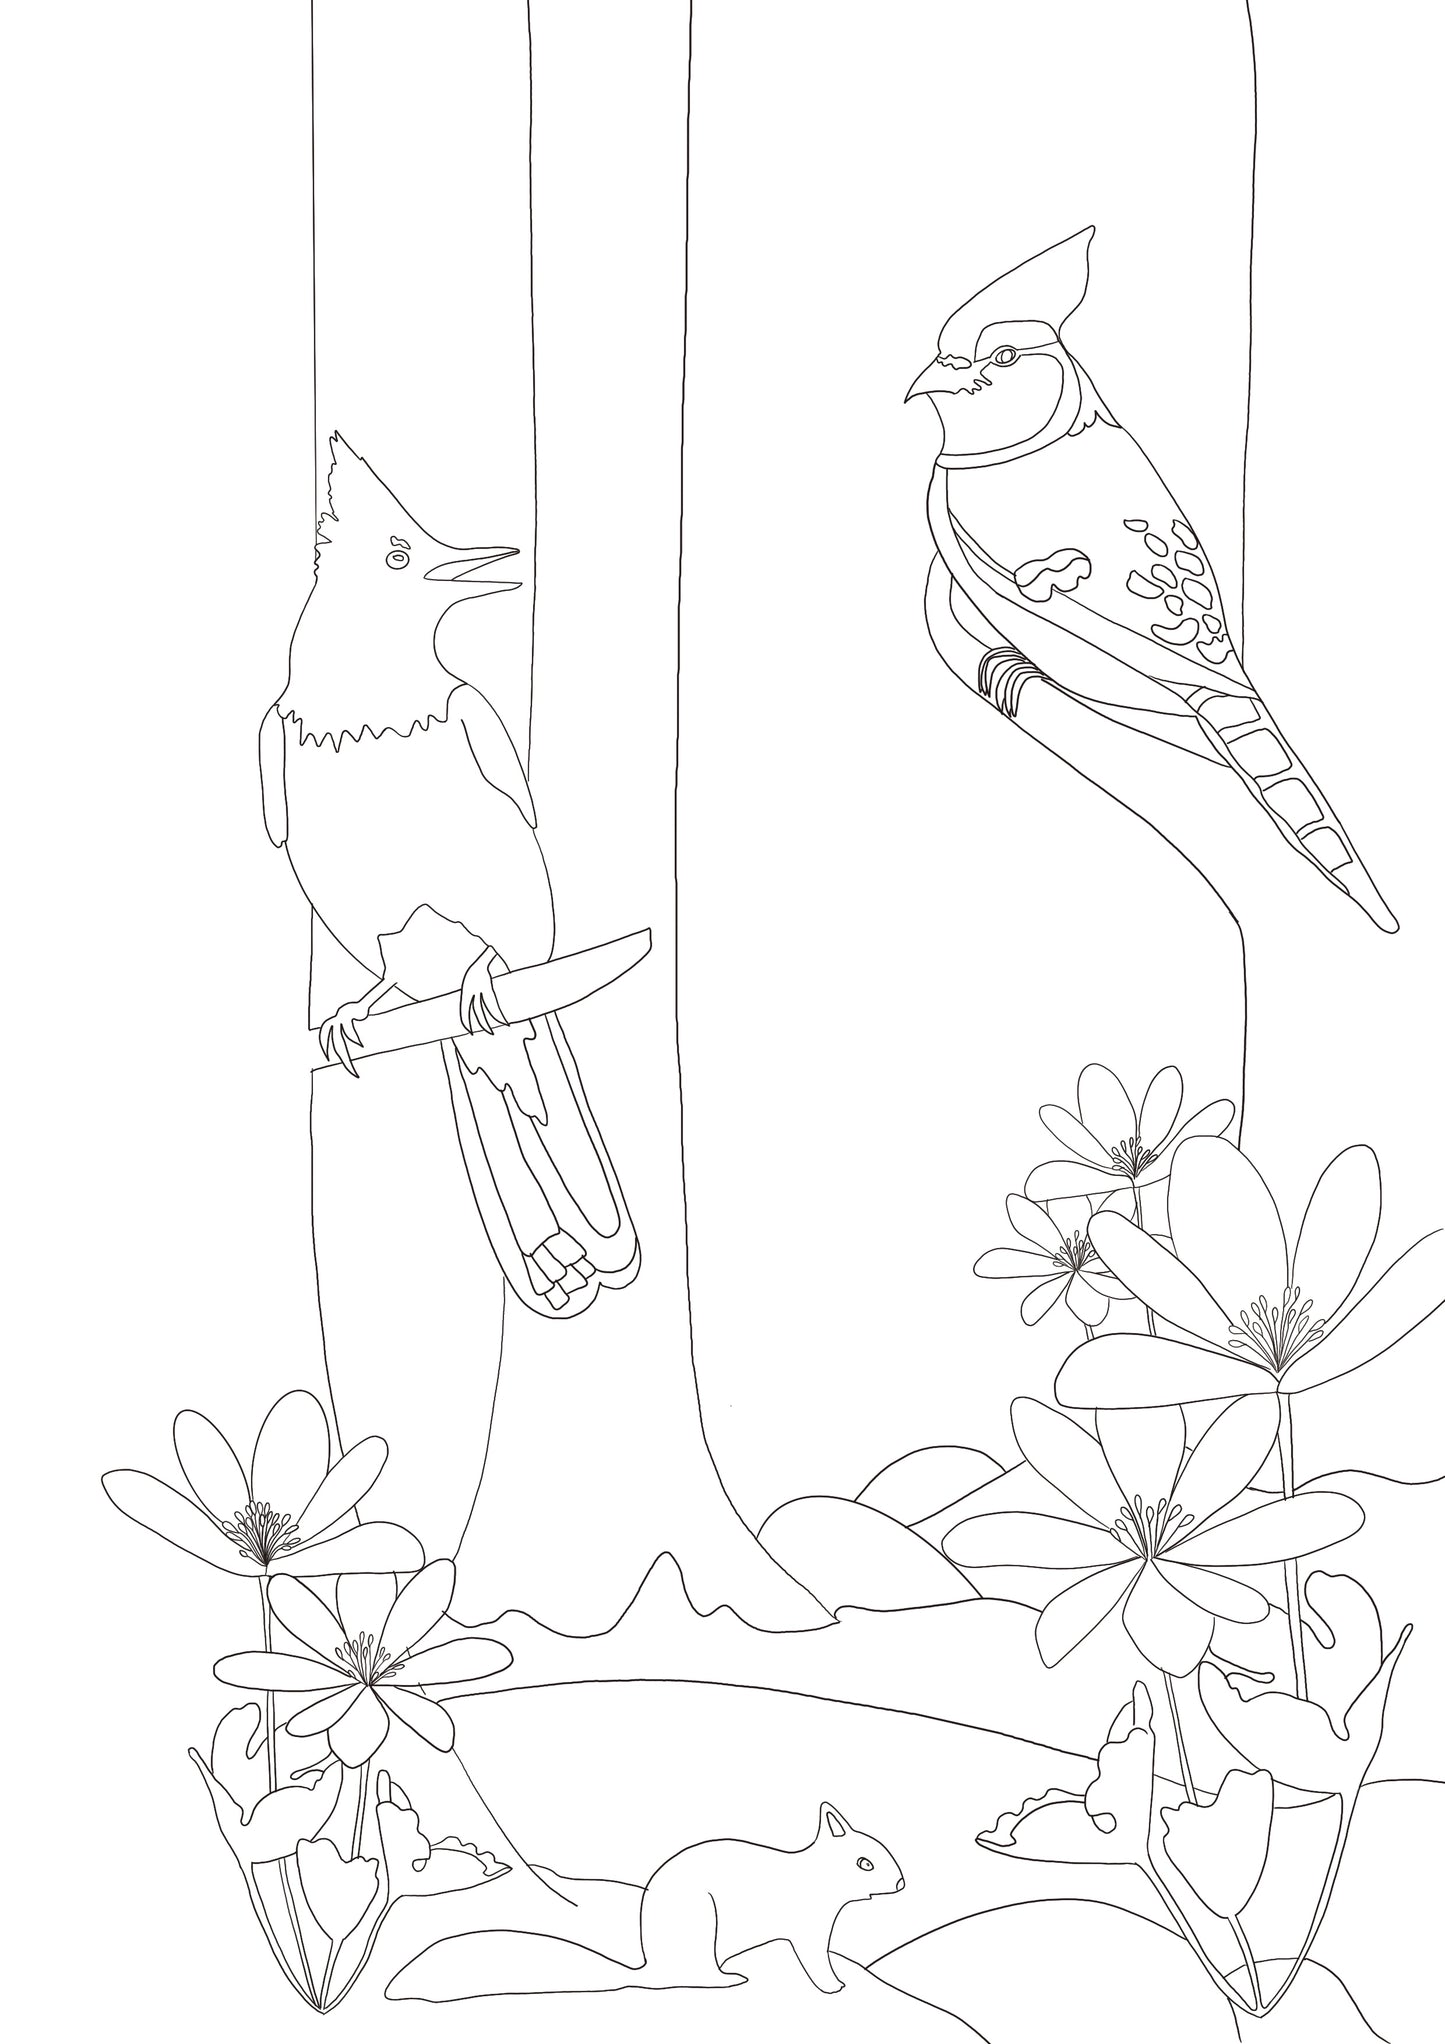 Coloring book - Fauna and flora from Canada